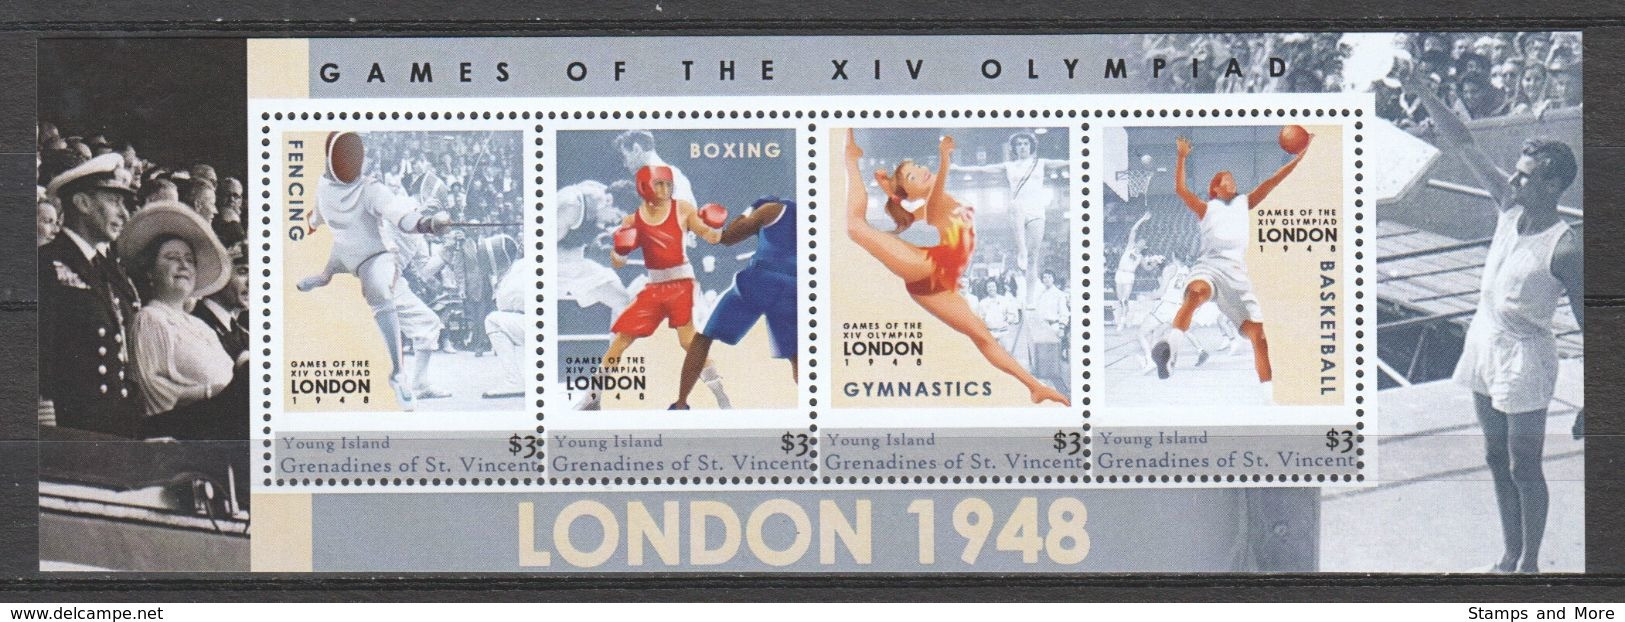 St Vincent Grenadines (Young Island) - MNH Sheet 2 SUMMER OLYMPICS LONDON 1948 - Zomer 1948: Londen